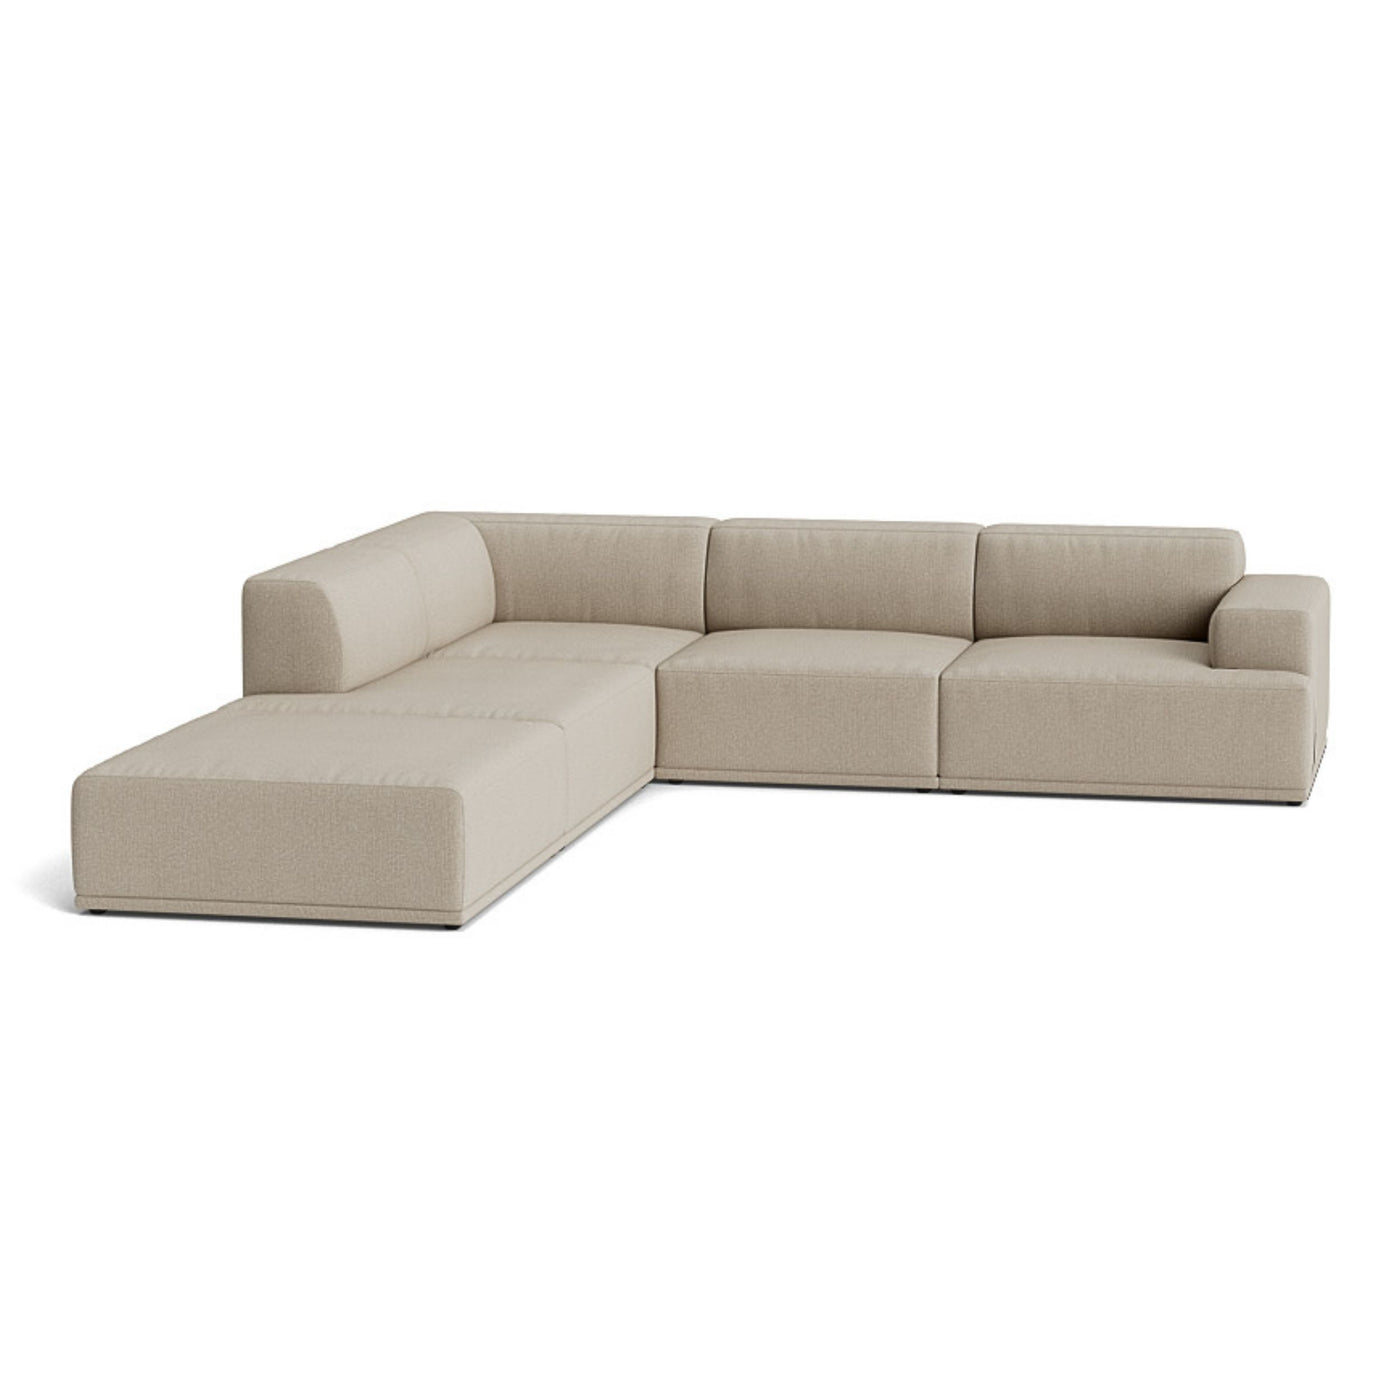 Muuto Connect Soft Modular Corner Sofa, configuration 1. Made-to-order from someday designs. #colour_clay-10